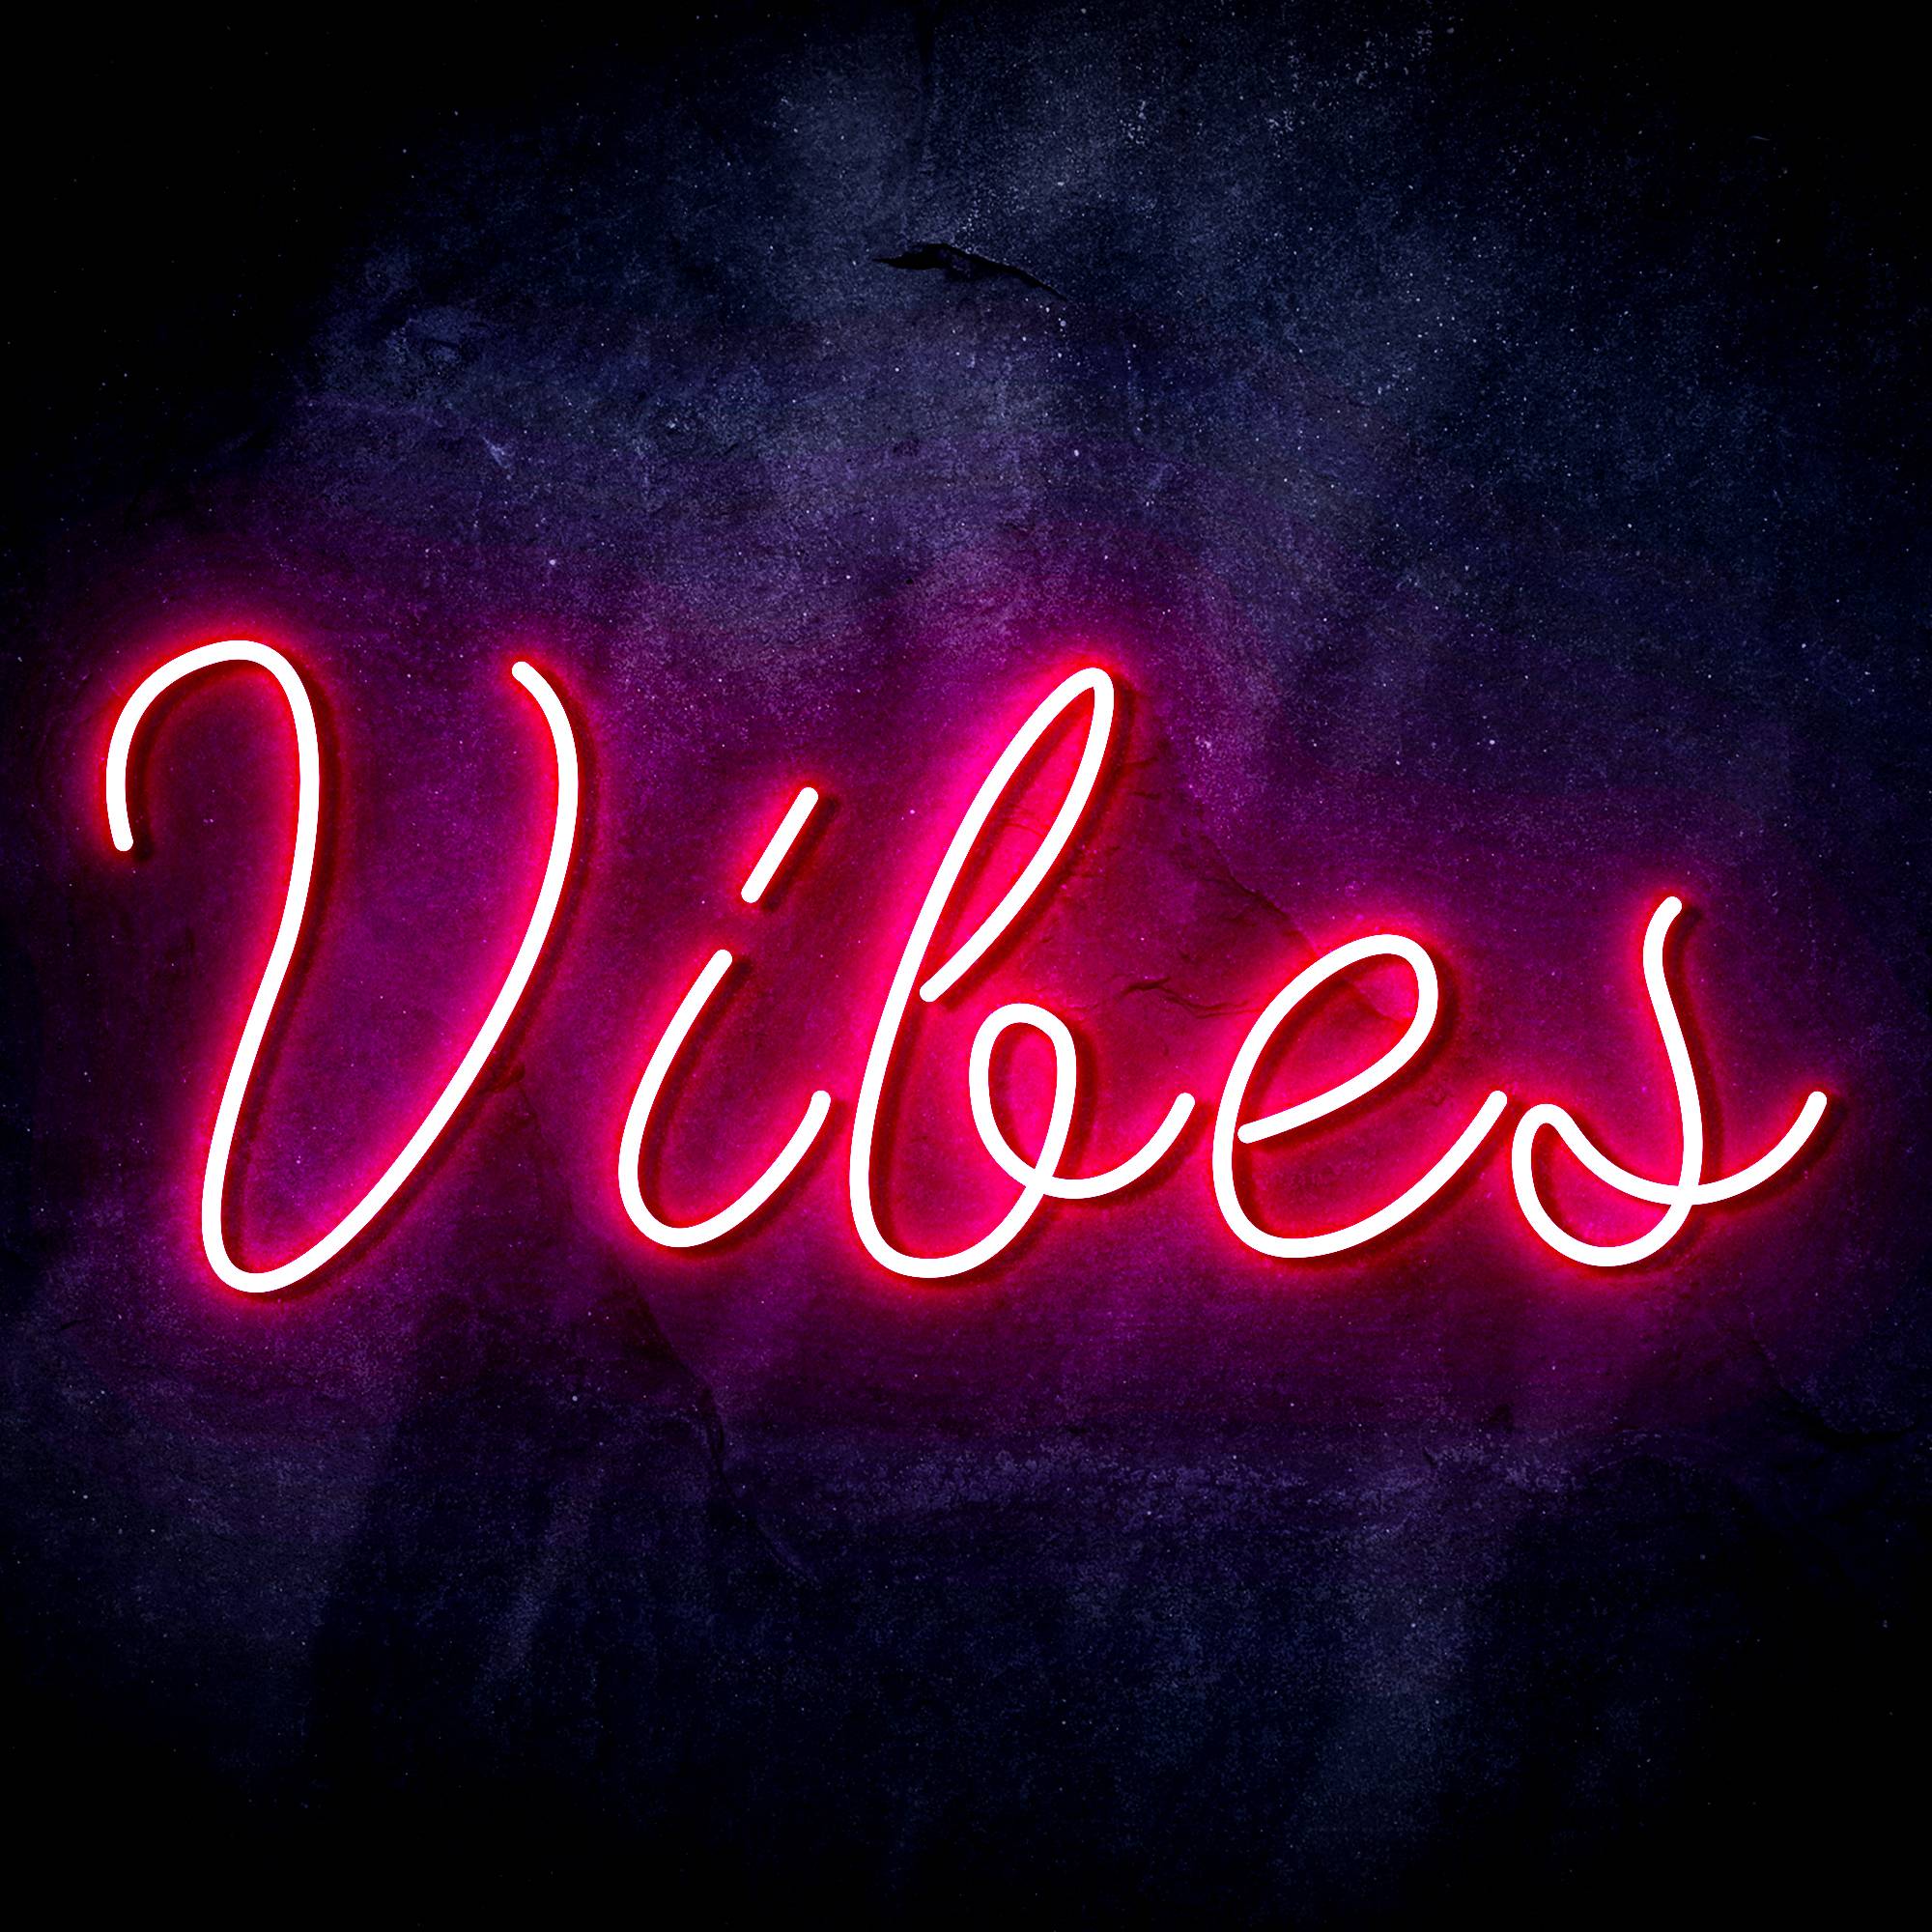 "Vibes" Text Quote LED Neon Sign